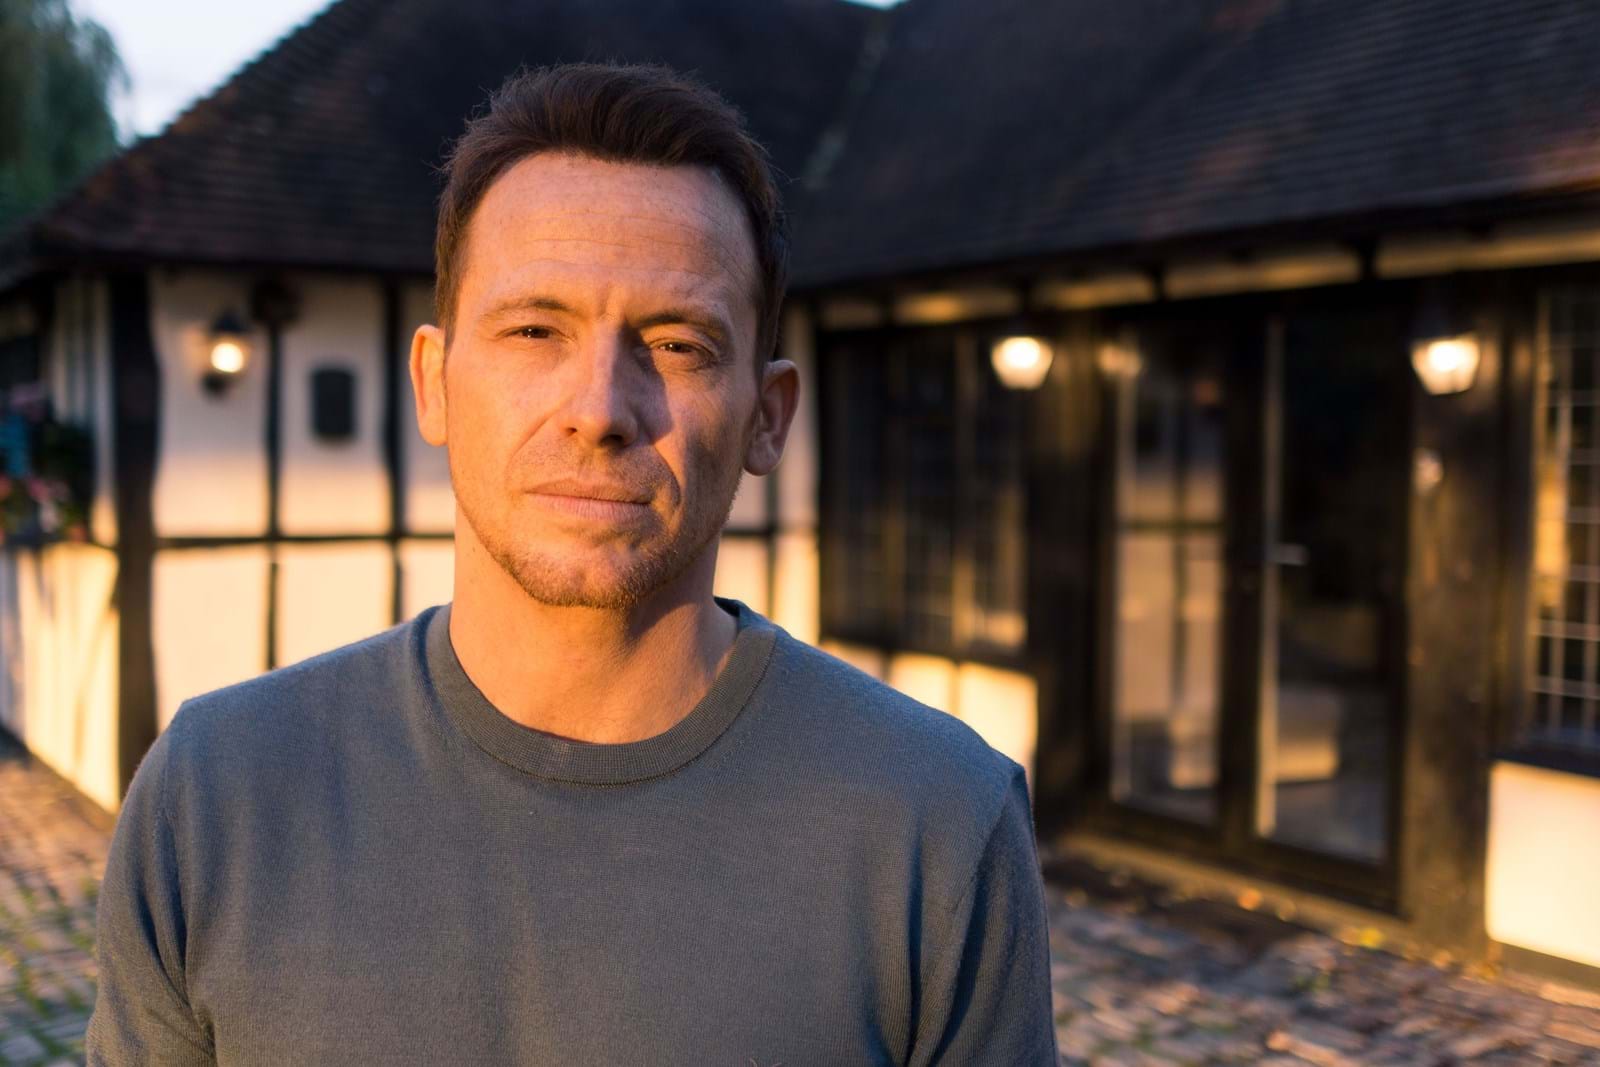 BBC Factual commissions Firecracker Films for one hour documentary with Joe Swash